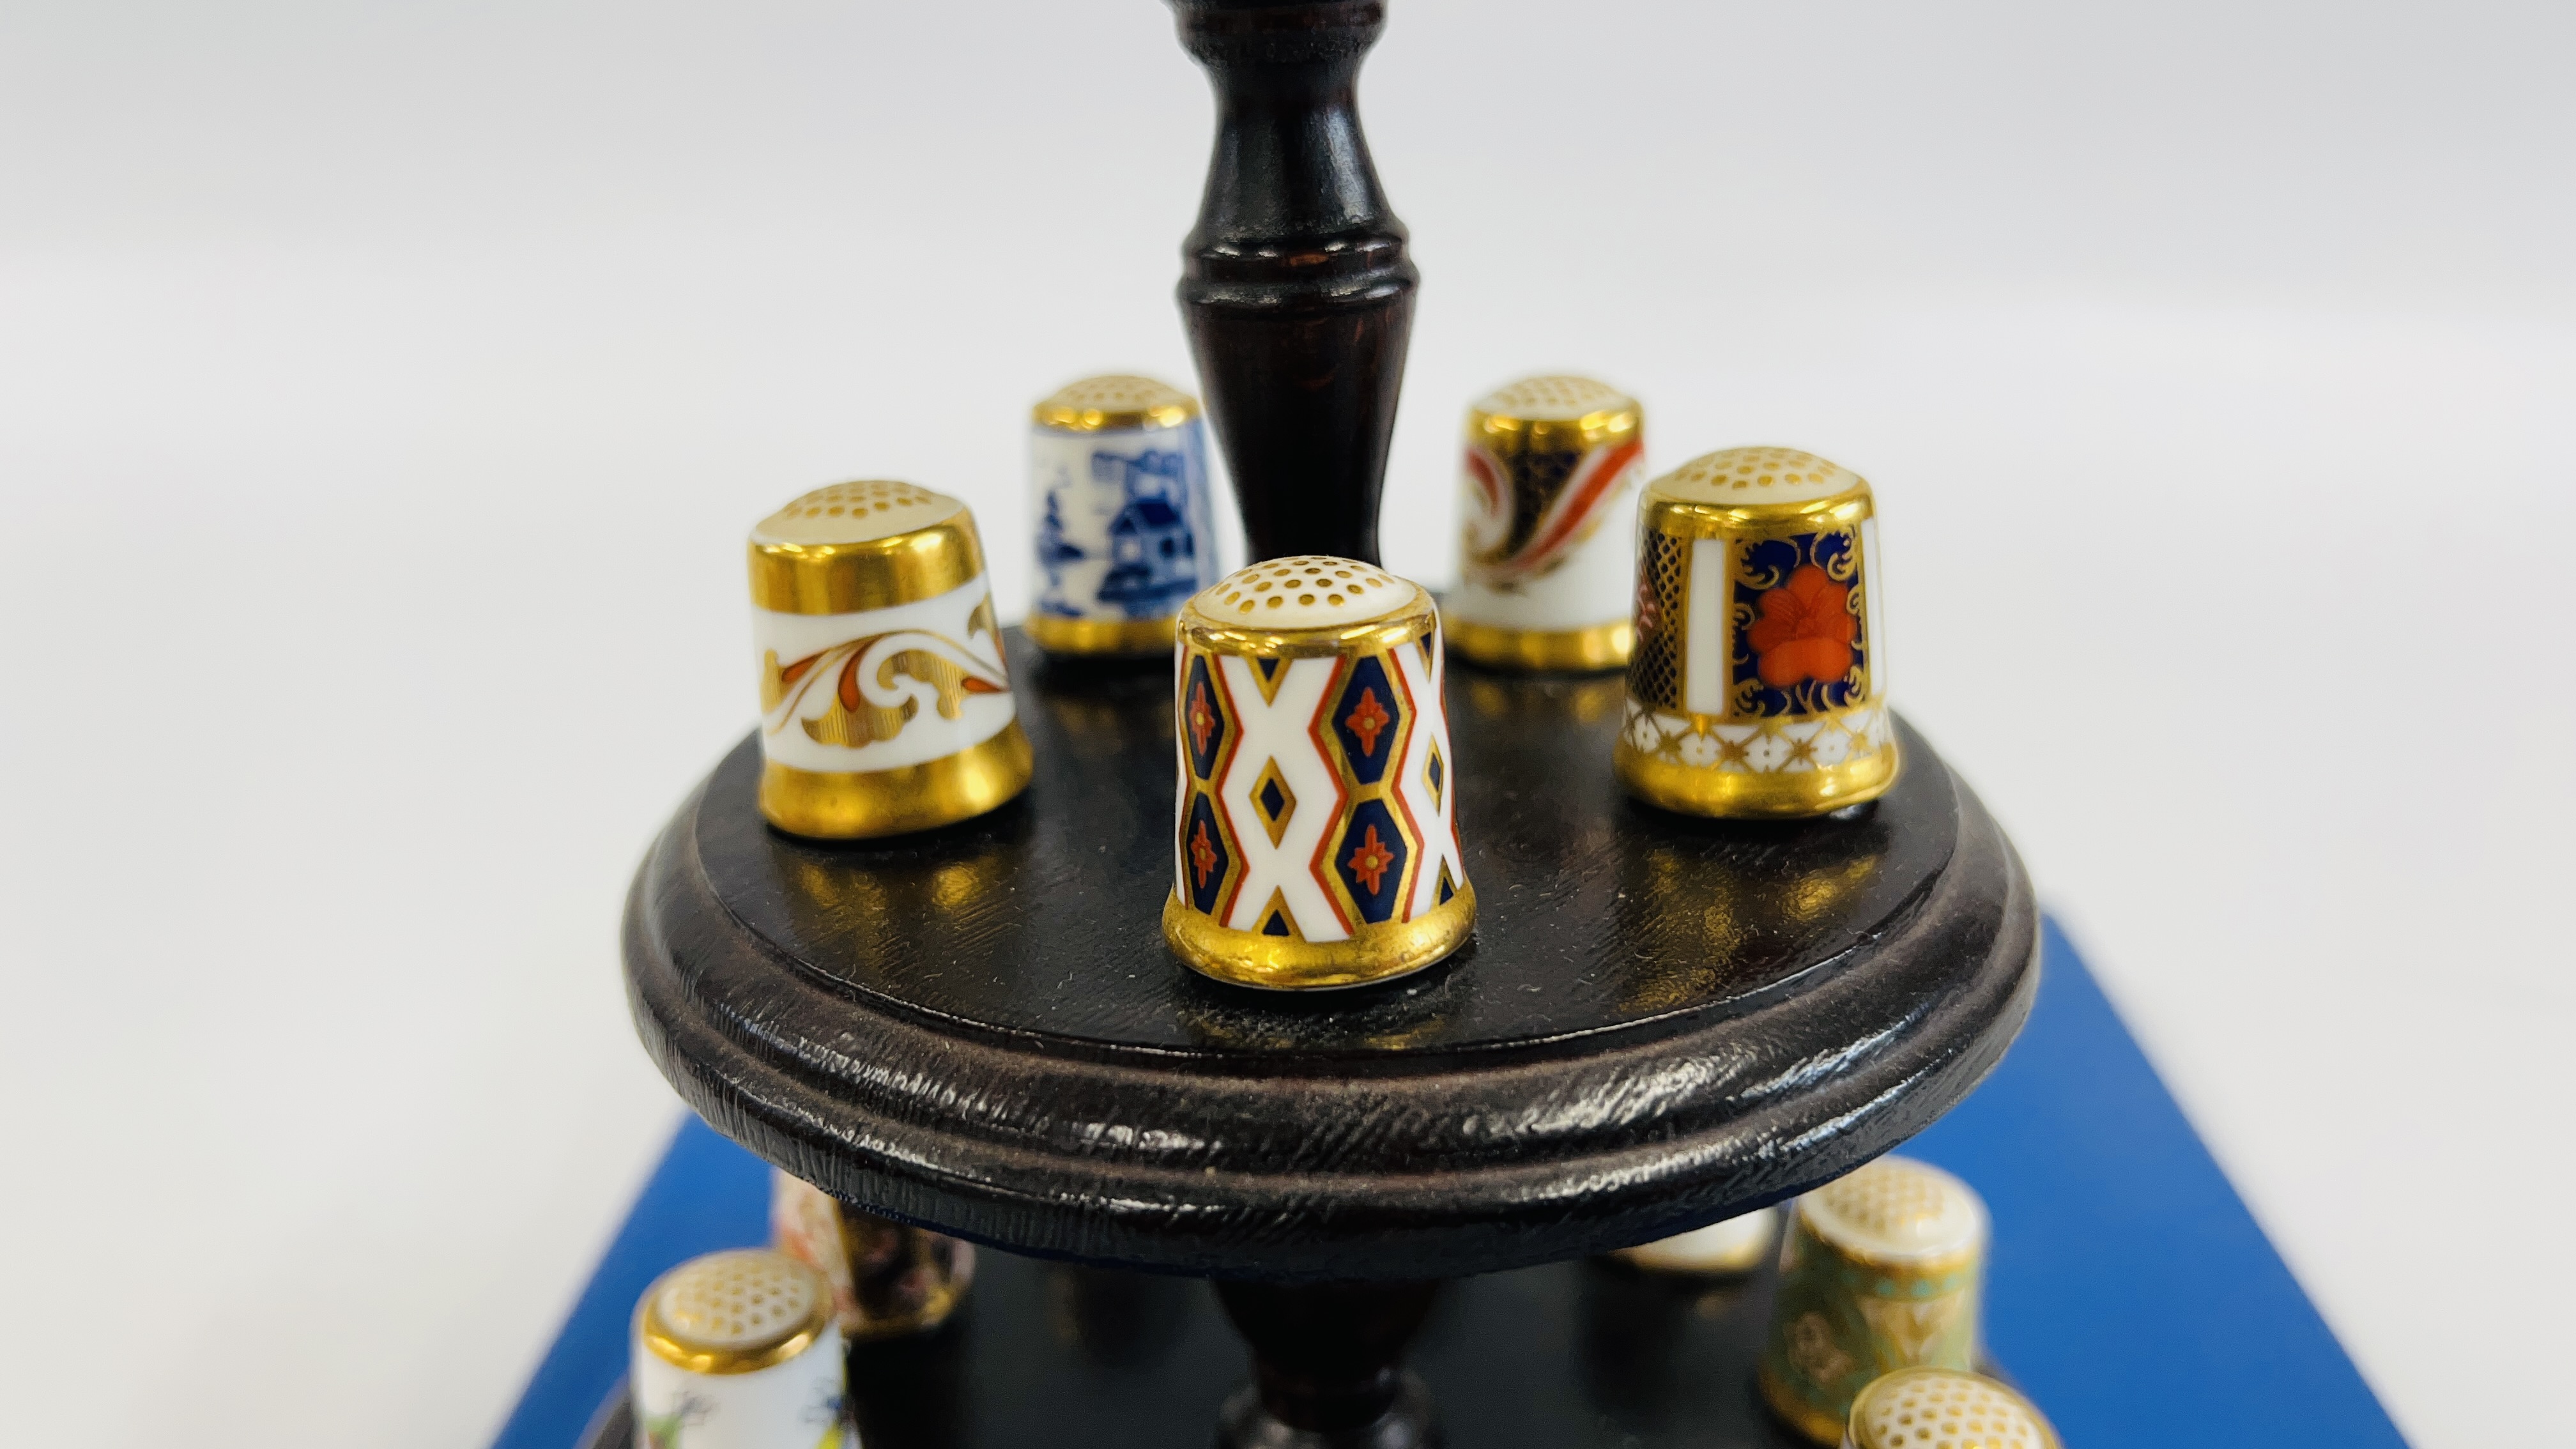 A COLLECTION OF 15 ROYAL CROWN DERBY THIMBLES ON A THIMBLE STAND WITH A PIN CUSHION INSET ALONG - Image 7 of 9